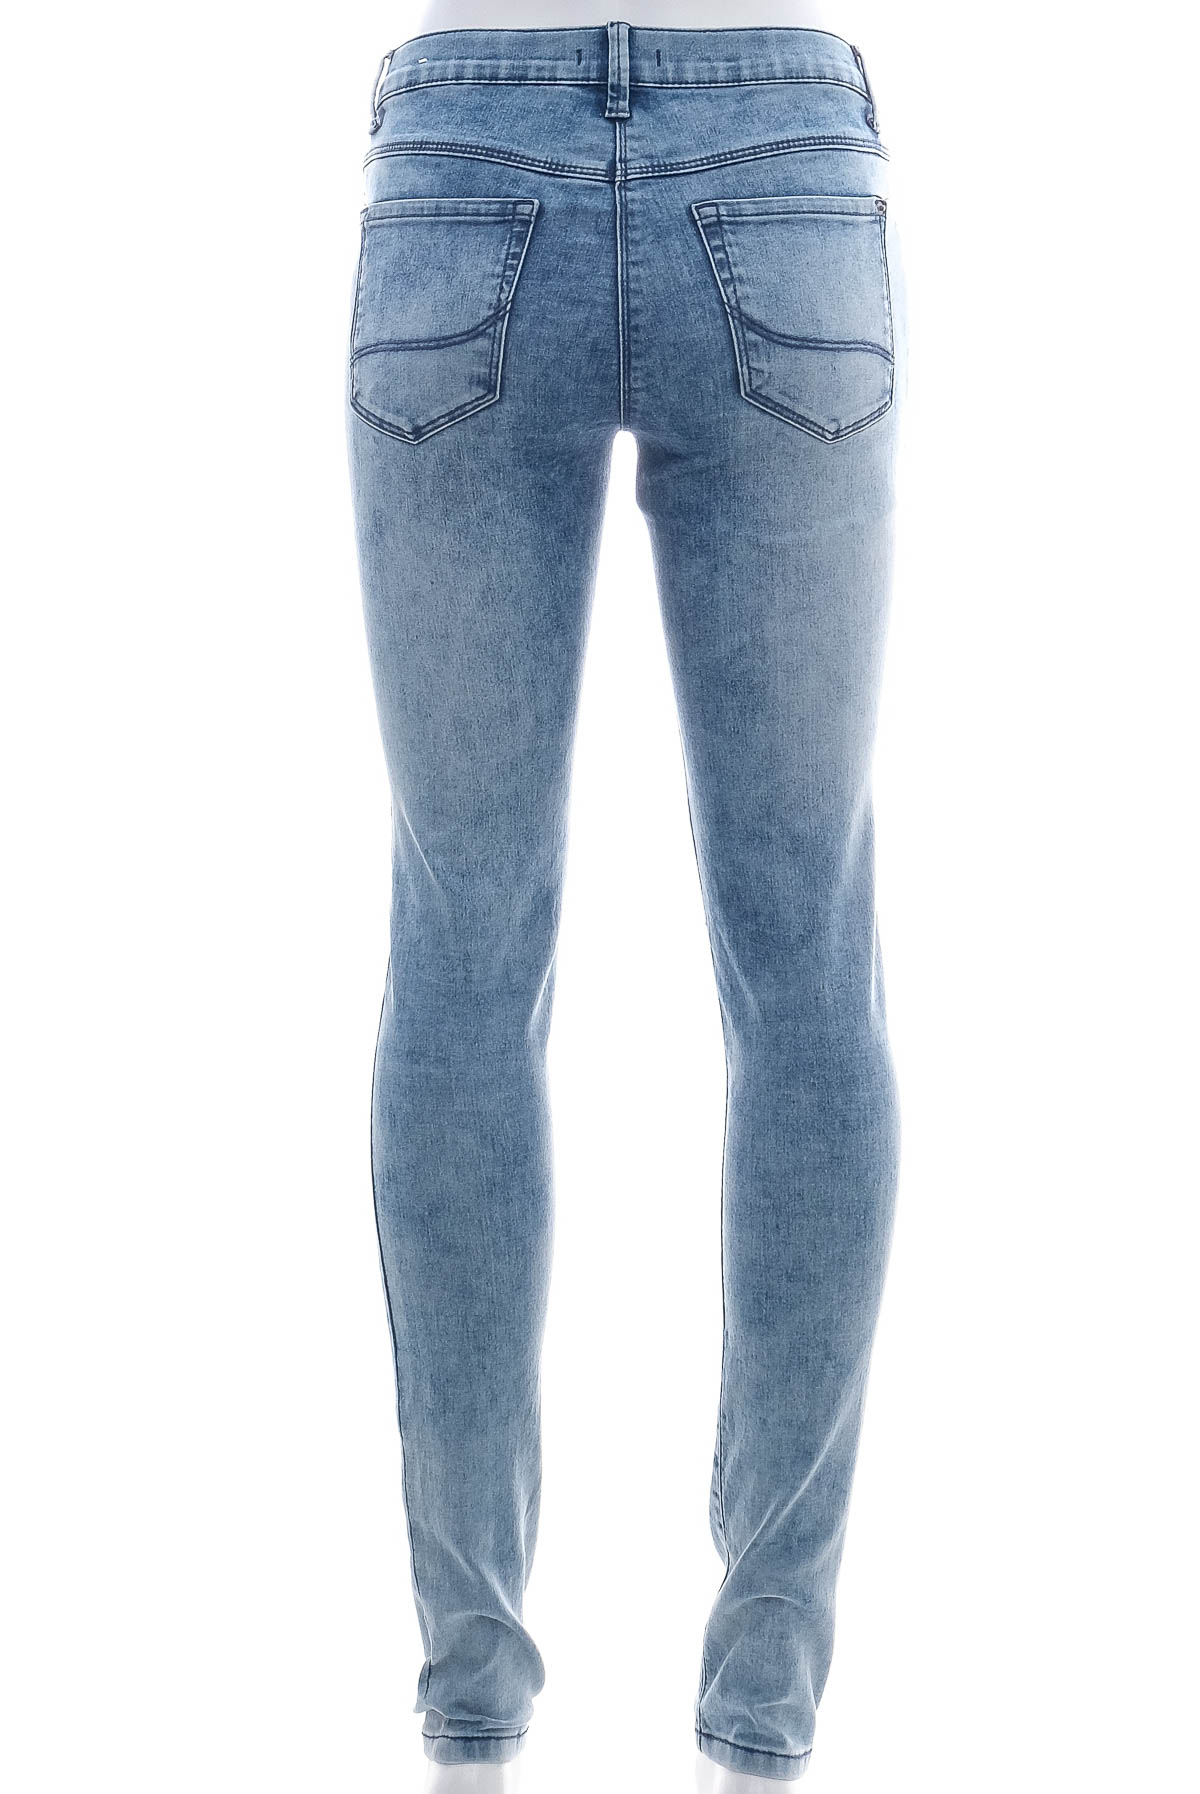 Women's jeans - S.Oliver - 1